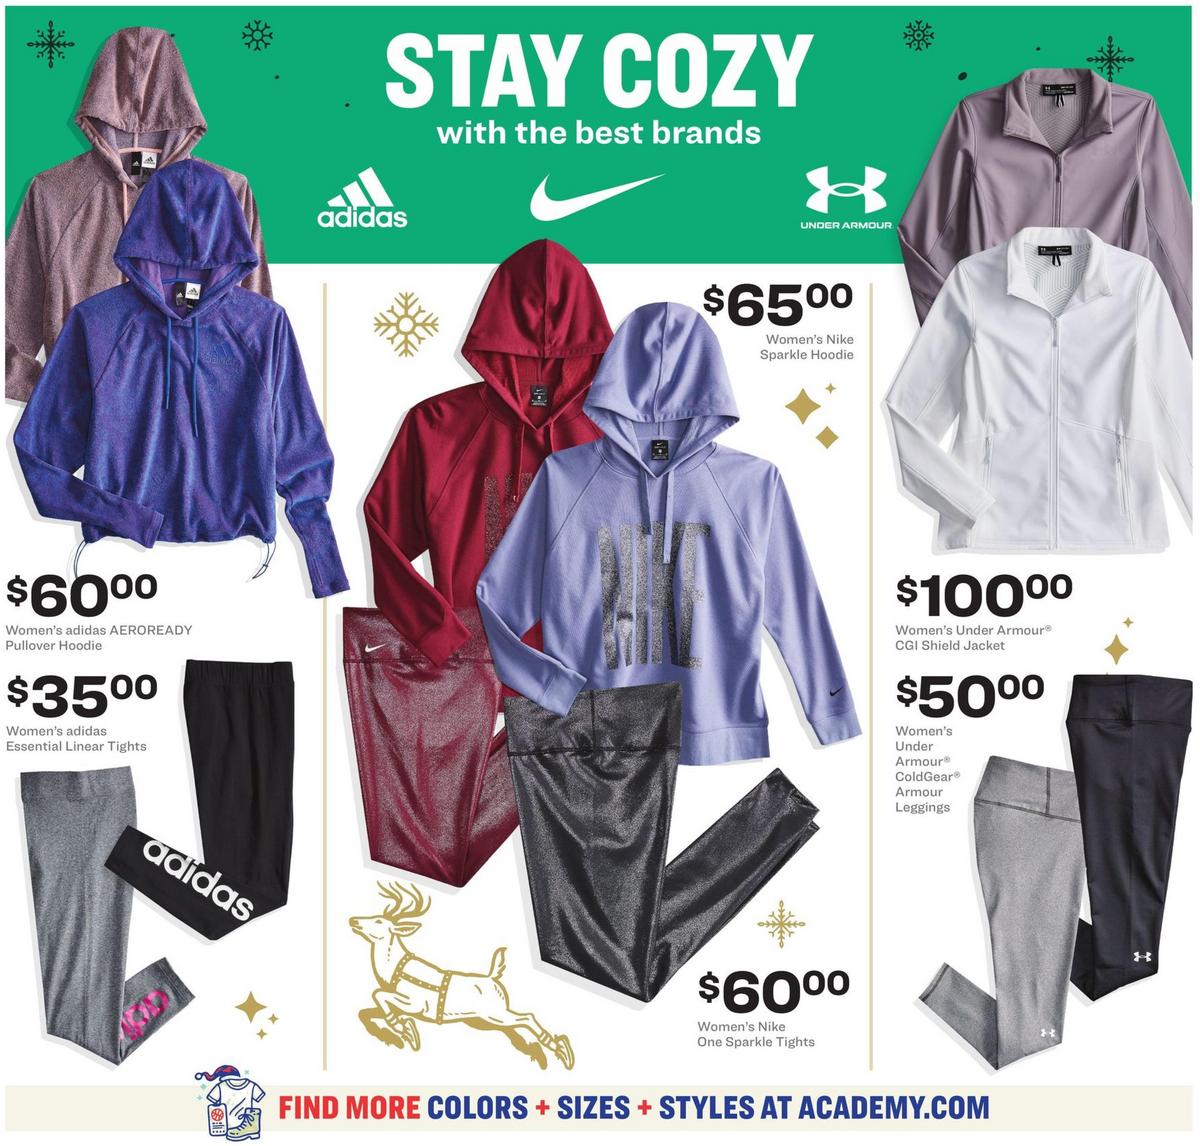 Academy Sports + Outdoors Weekly Ad from November 29